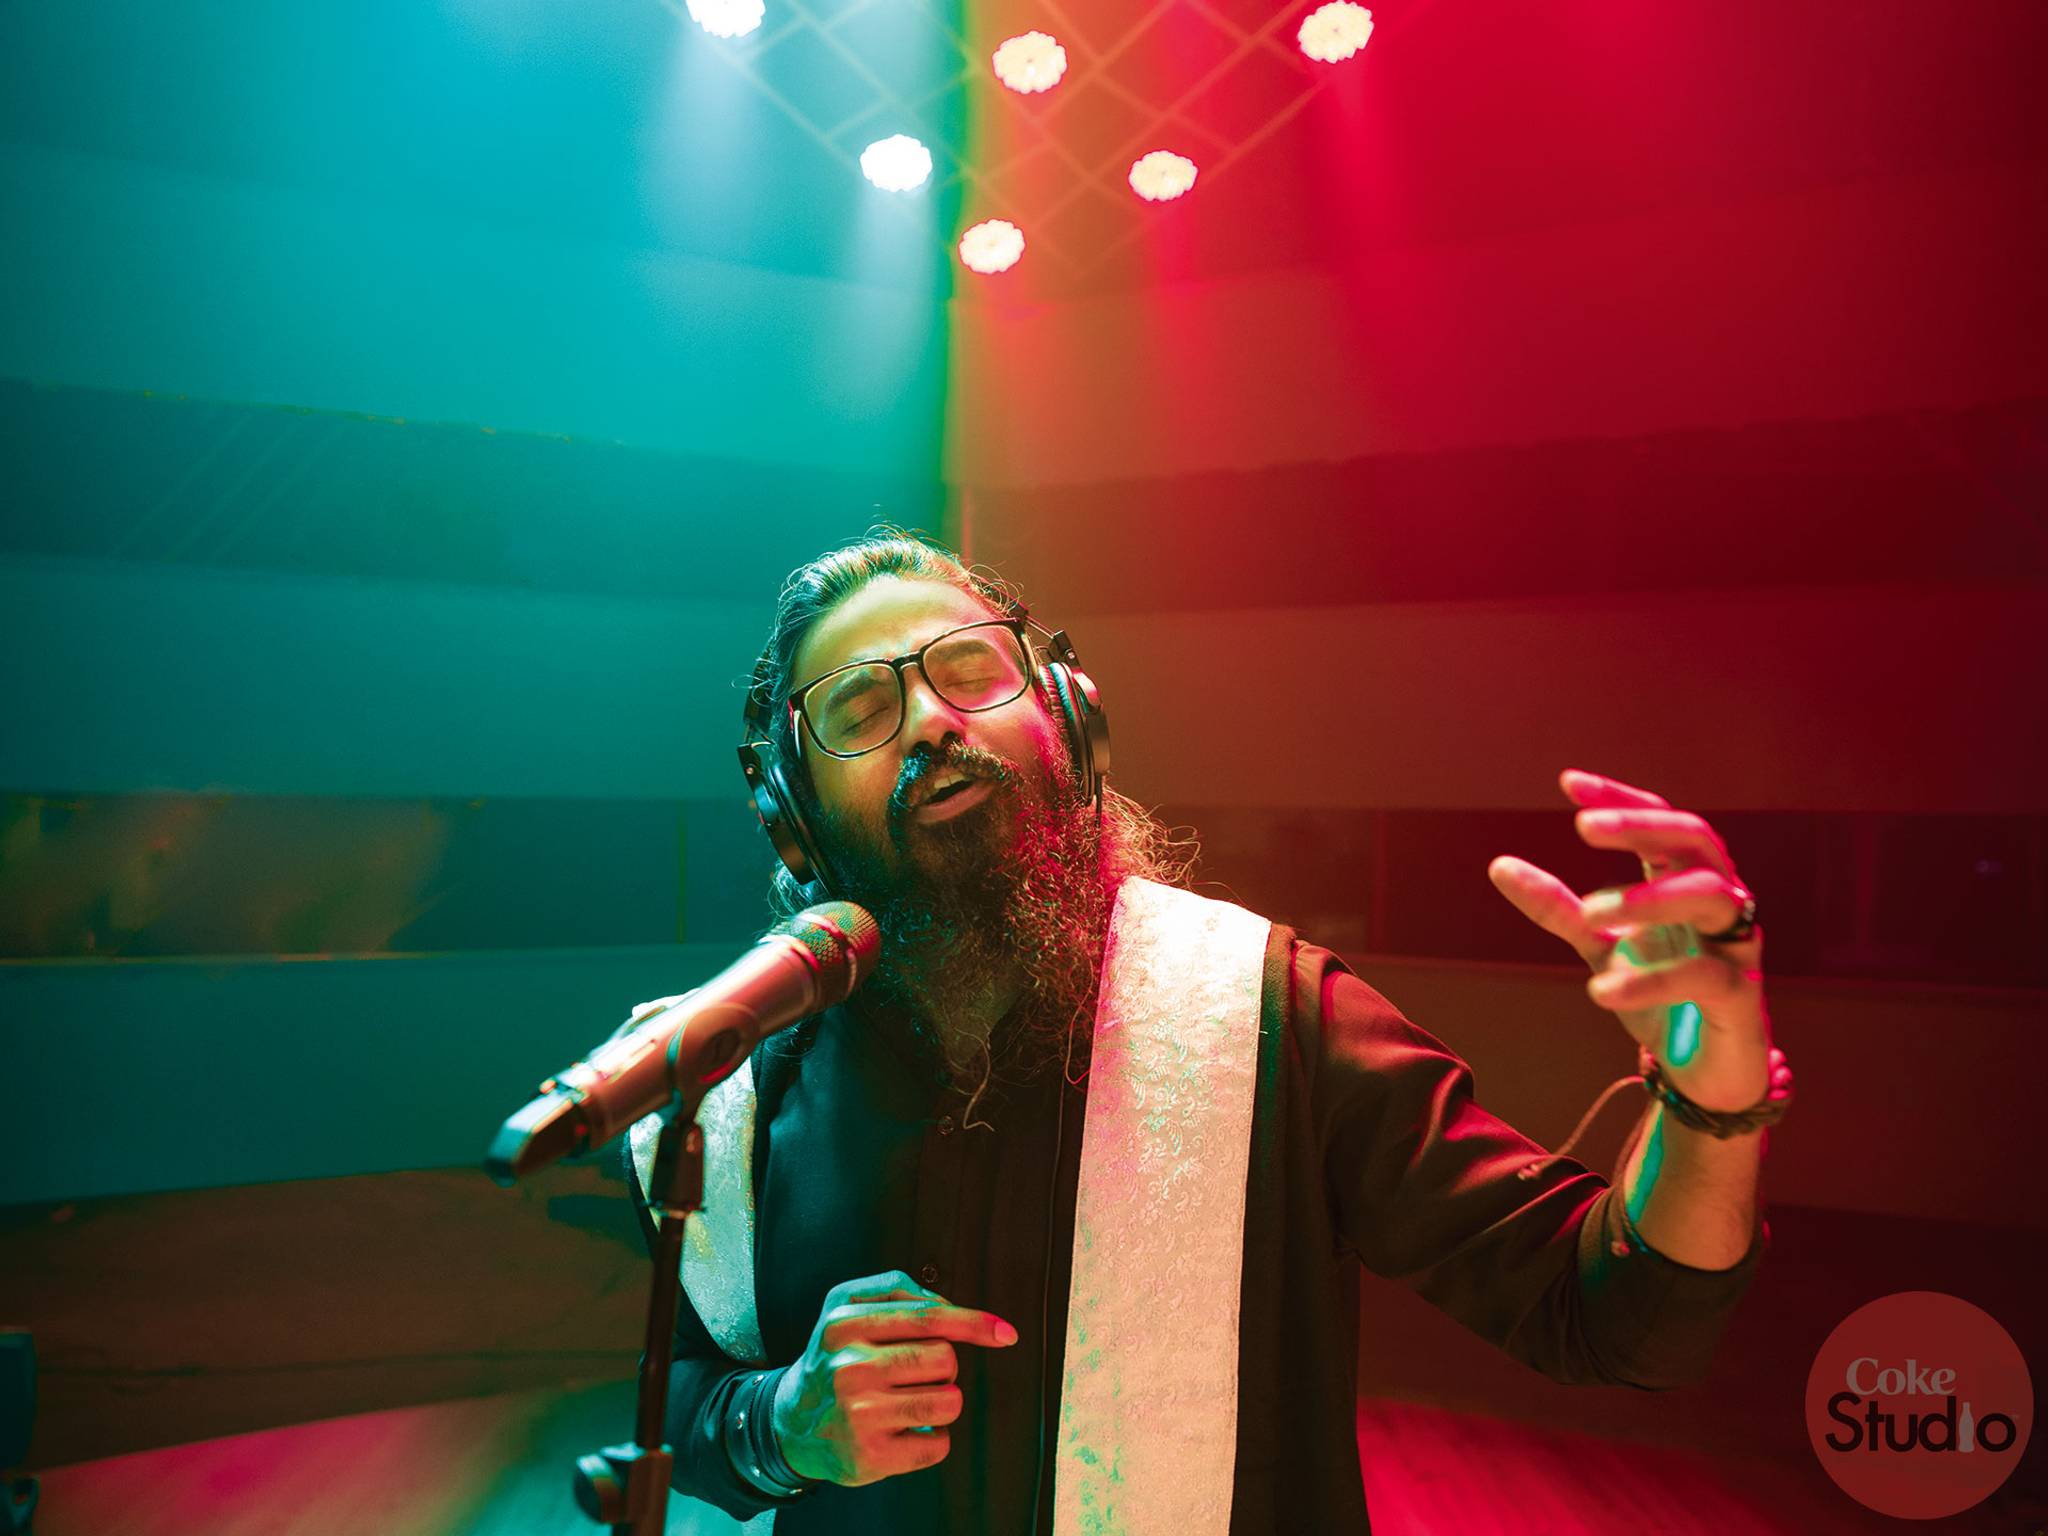 Coke Studio: unifying people through music and culture